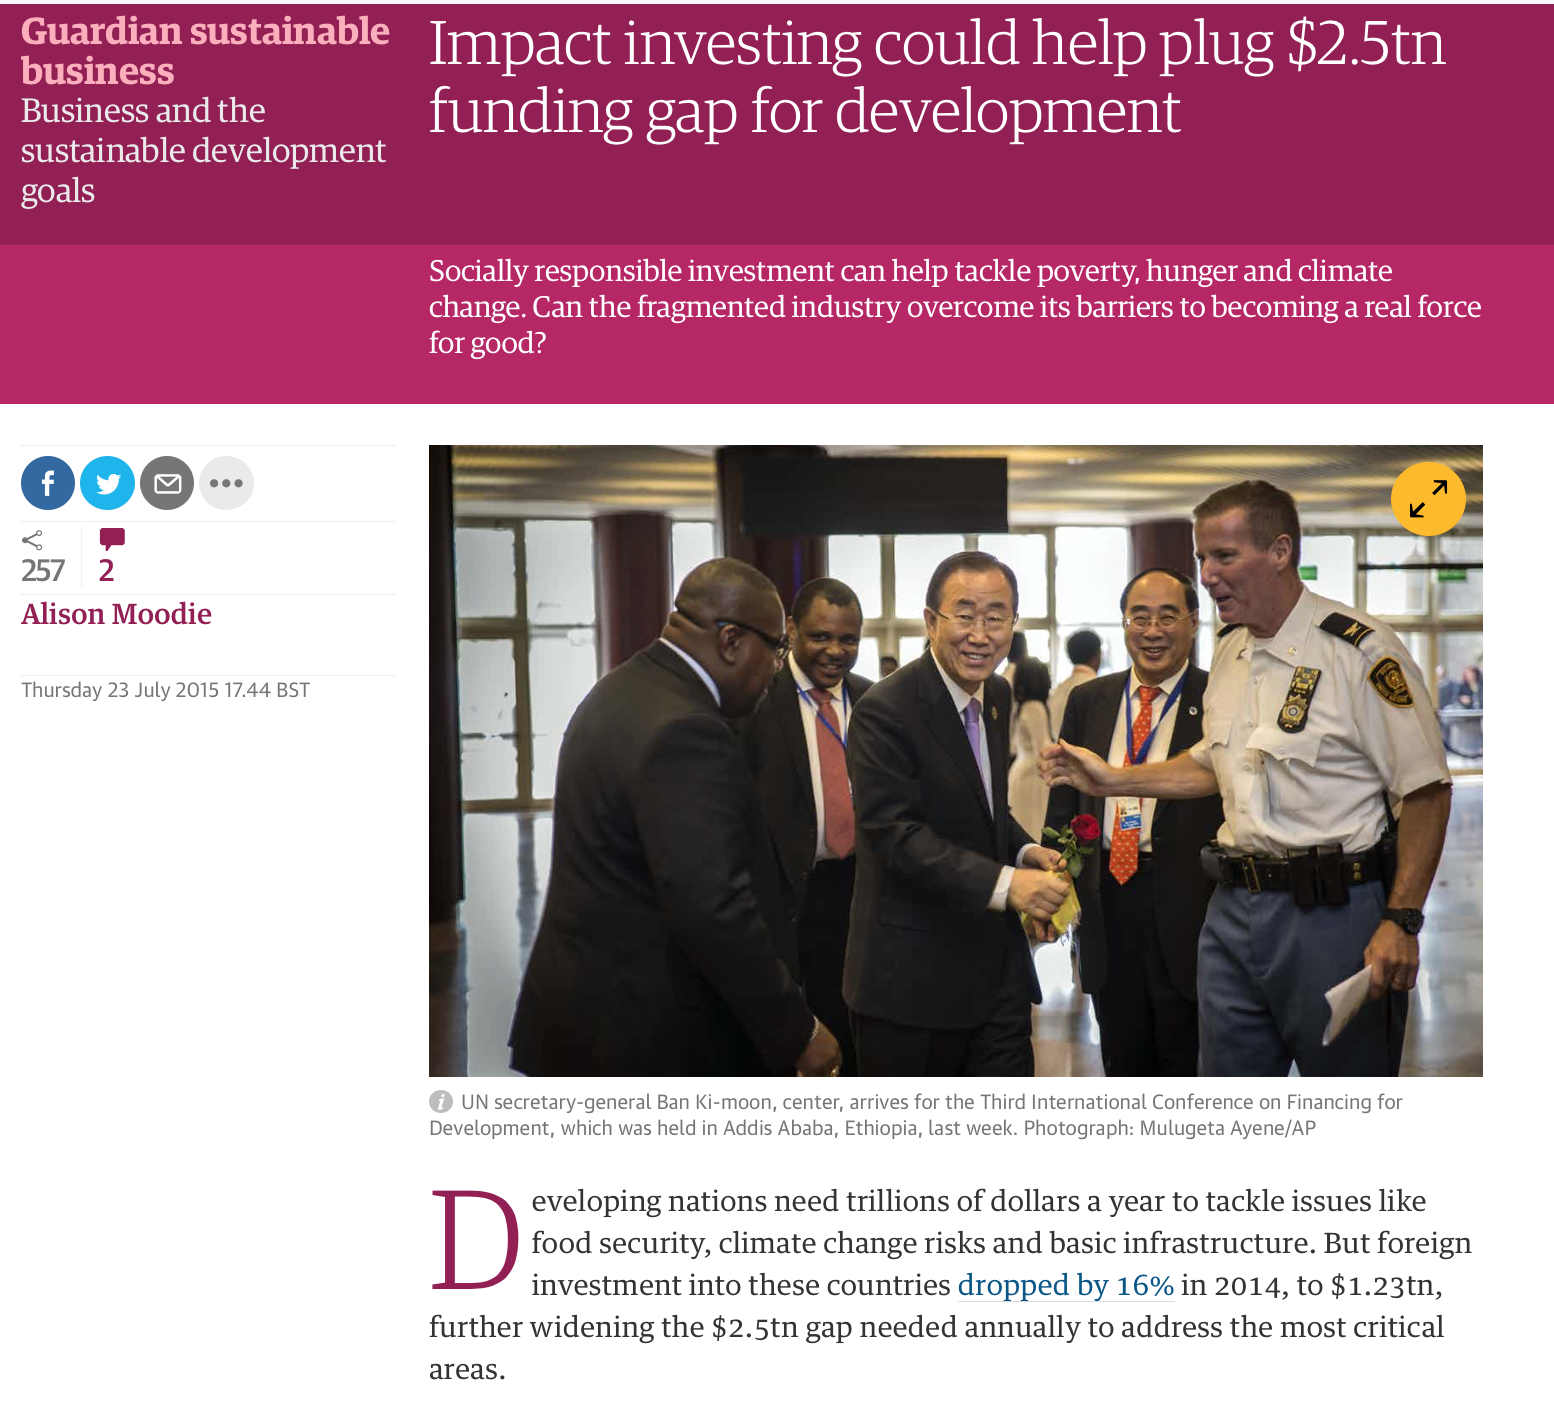 Impact Investing could help plus 2.5tn funding gap for development